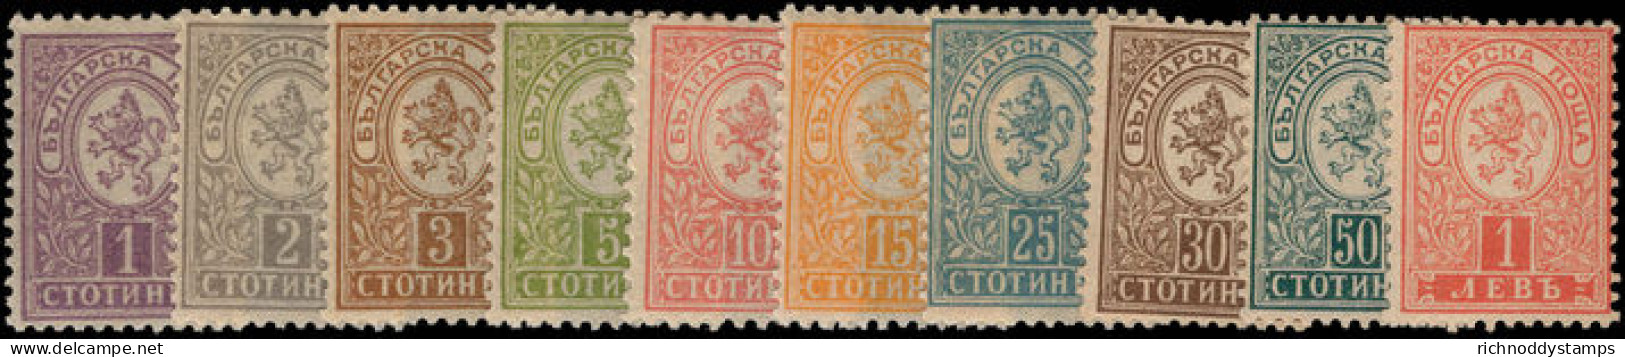 Bulgaria 1889-91 Perf 13&#8364; Set (10st & 15st Different Perfs) Fine Lightly Mounted Mint. - Unused Stamps